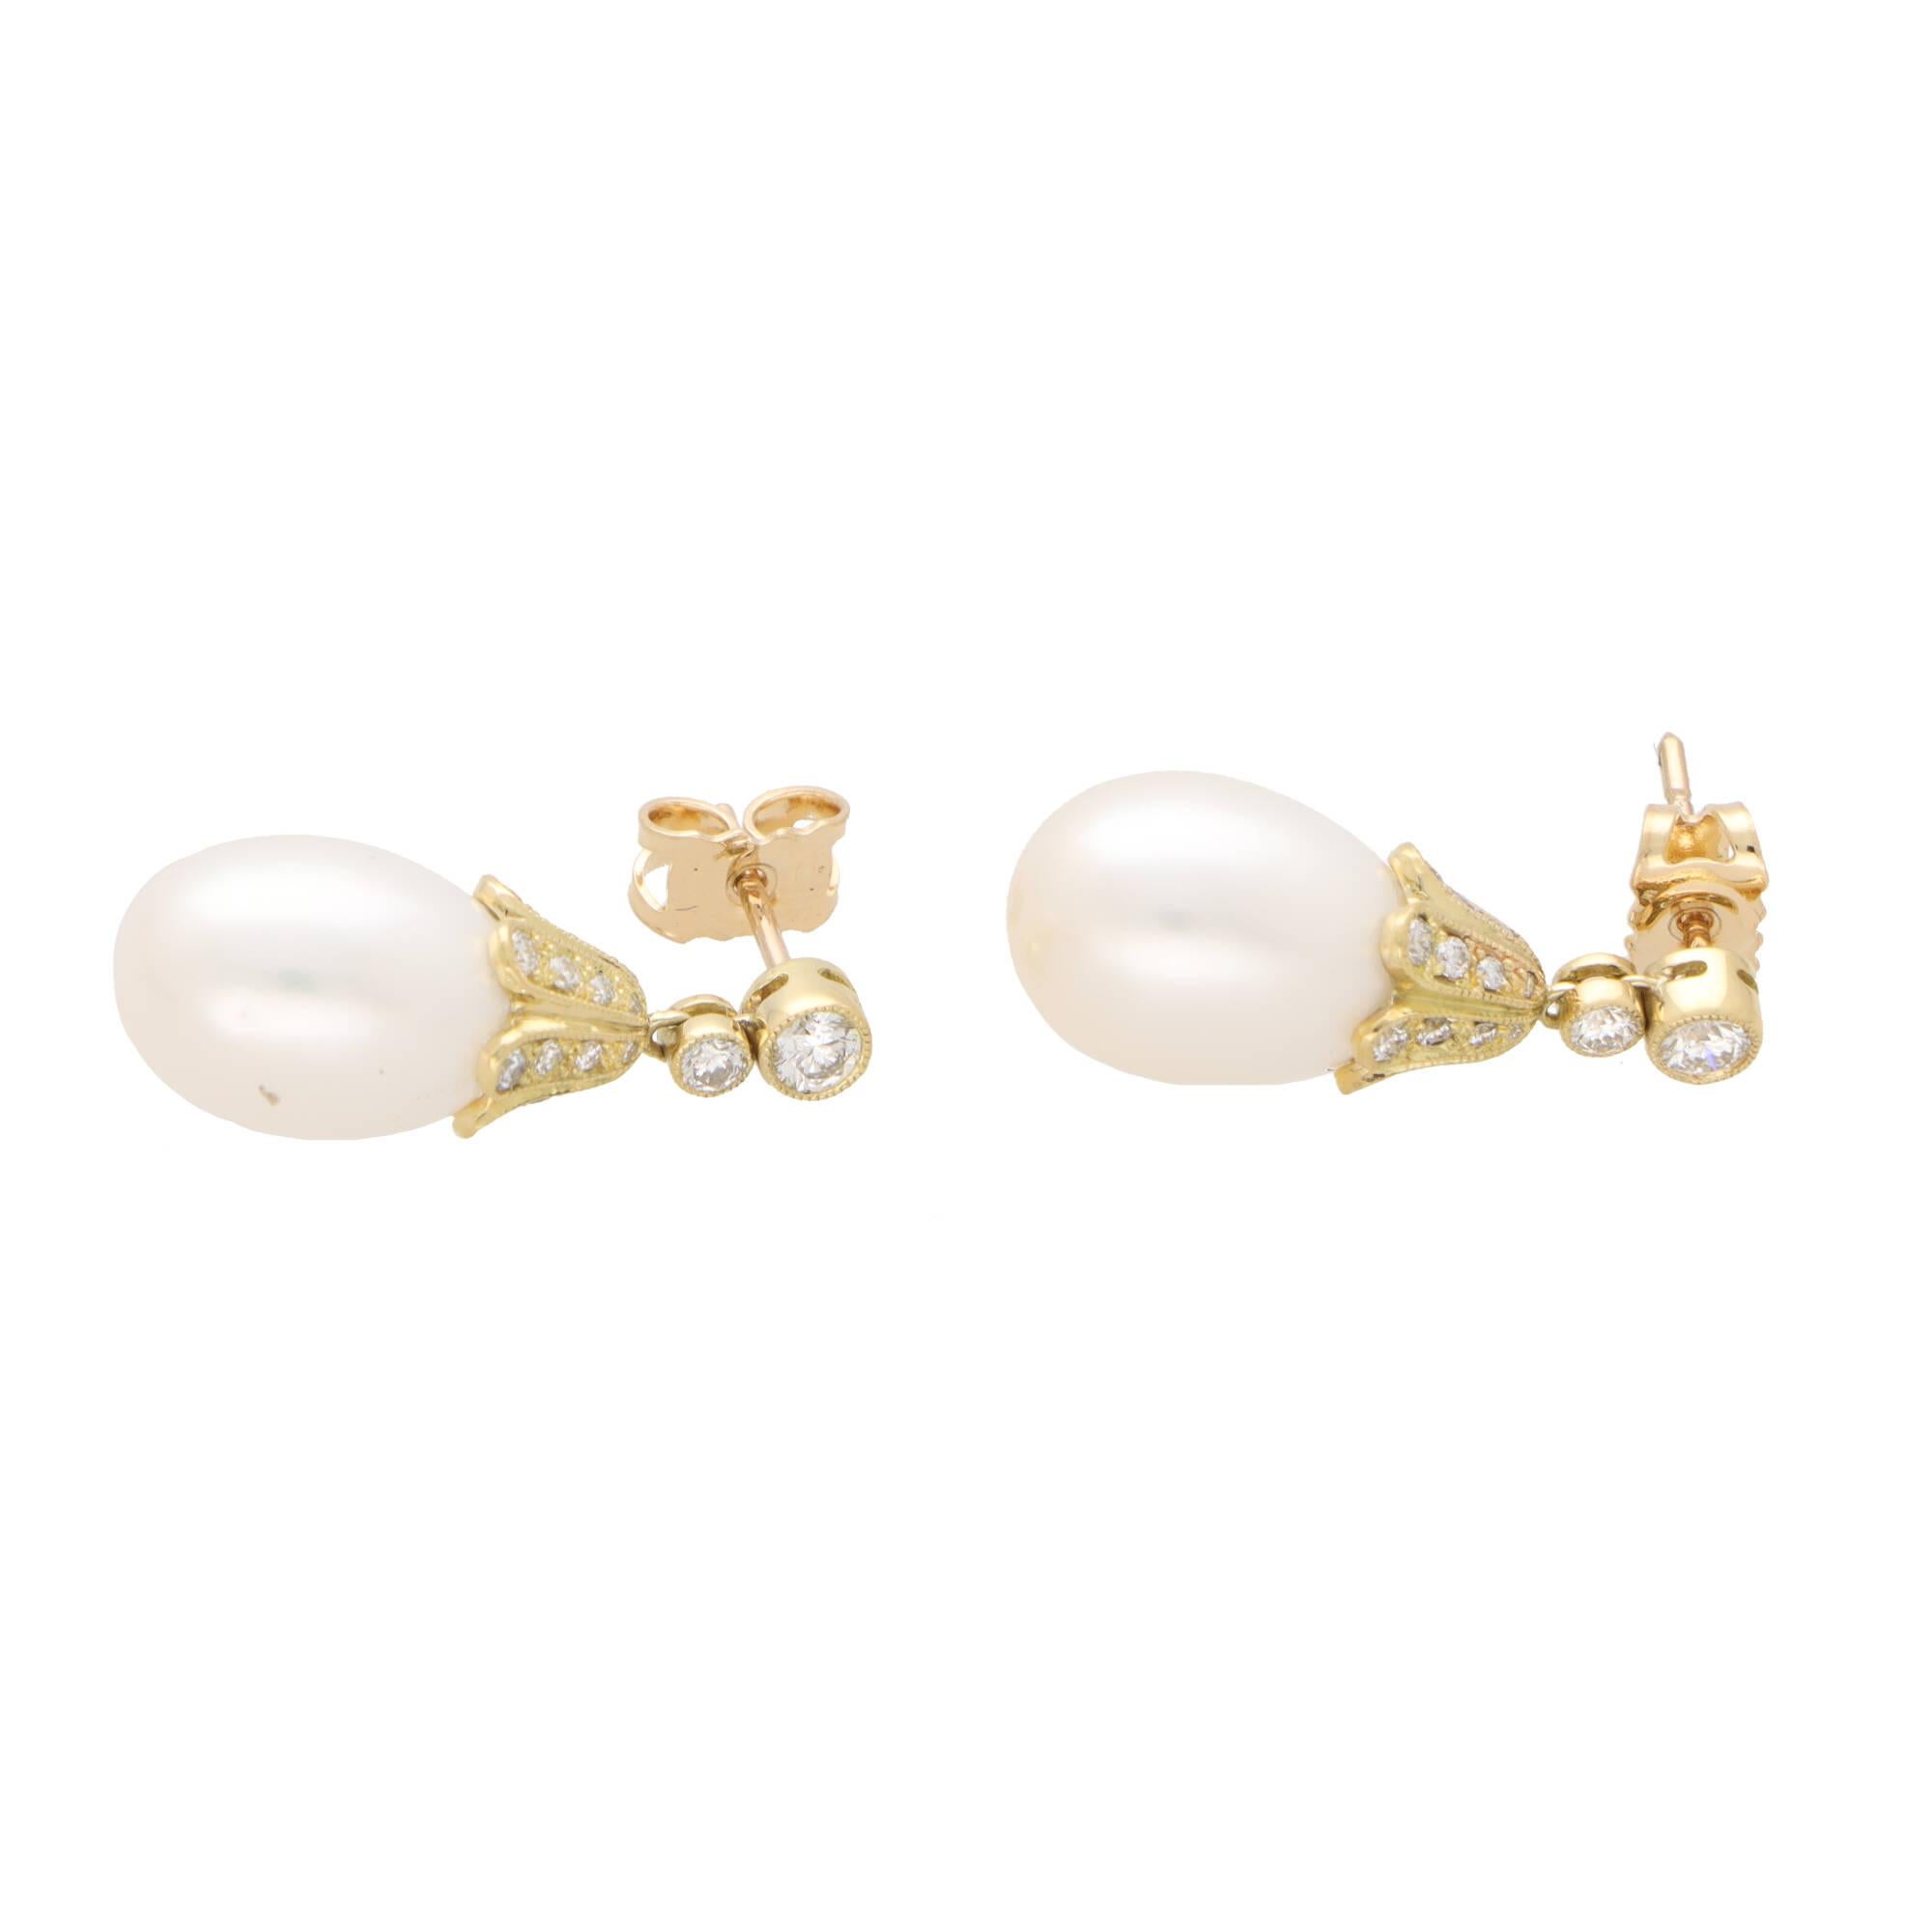 A beautiful pair of white cultured pearl and diamond drop earrings set in 18k yellow gold.

Each earring is firstly composed of a rub over round brilliant cut diamond stud, secured to reverse with a post and butterfly fitting. Hanging freely from